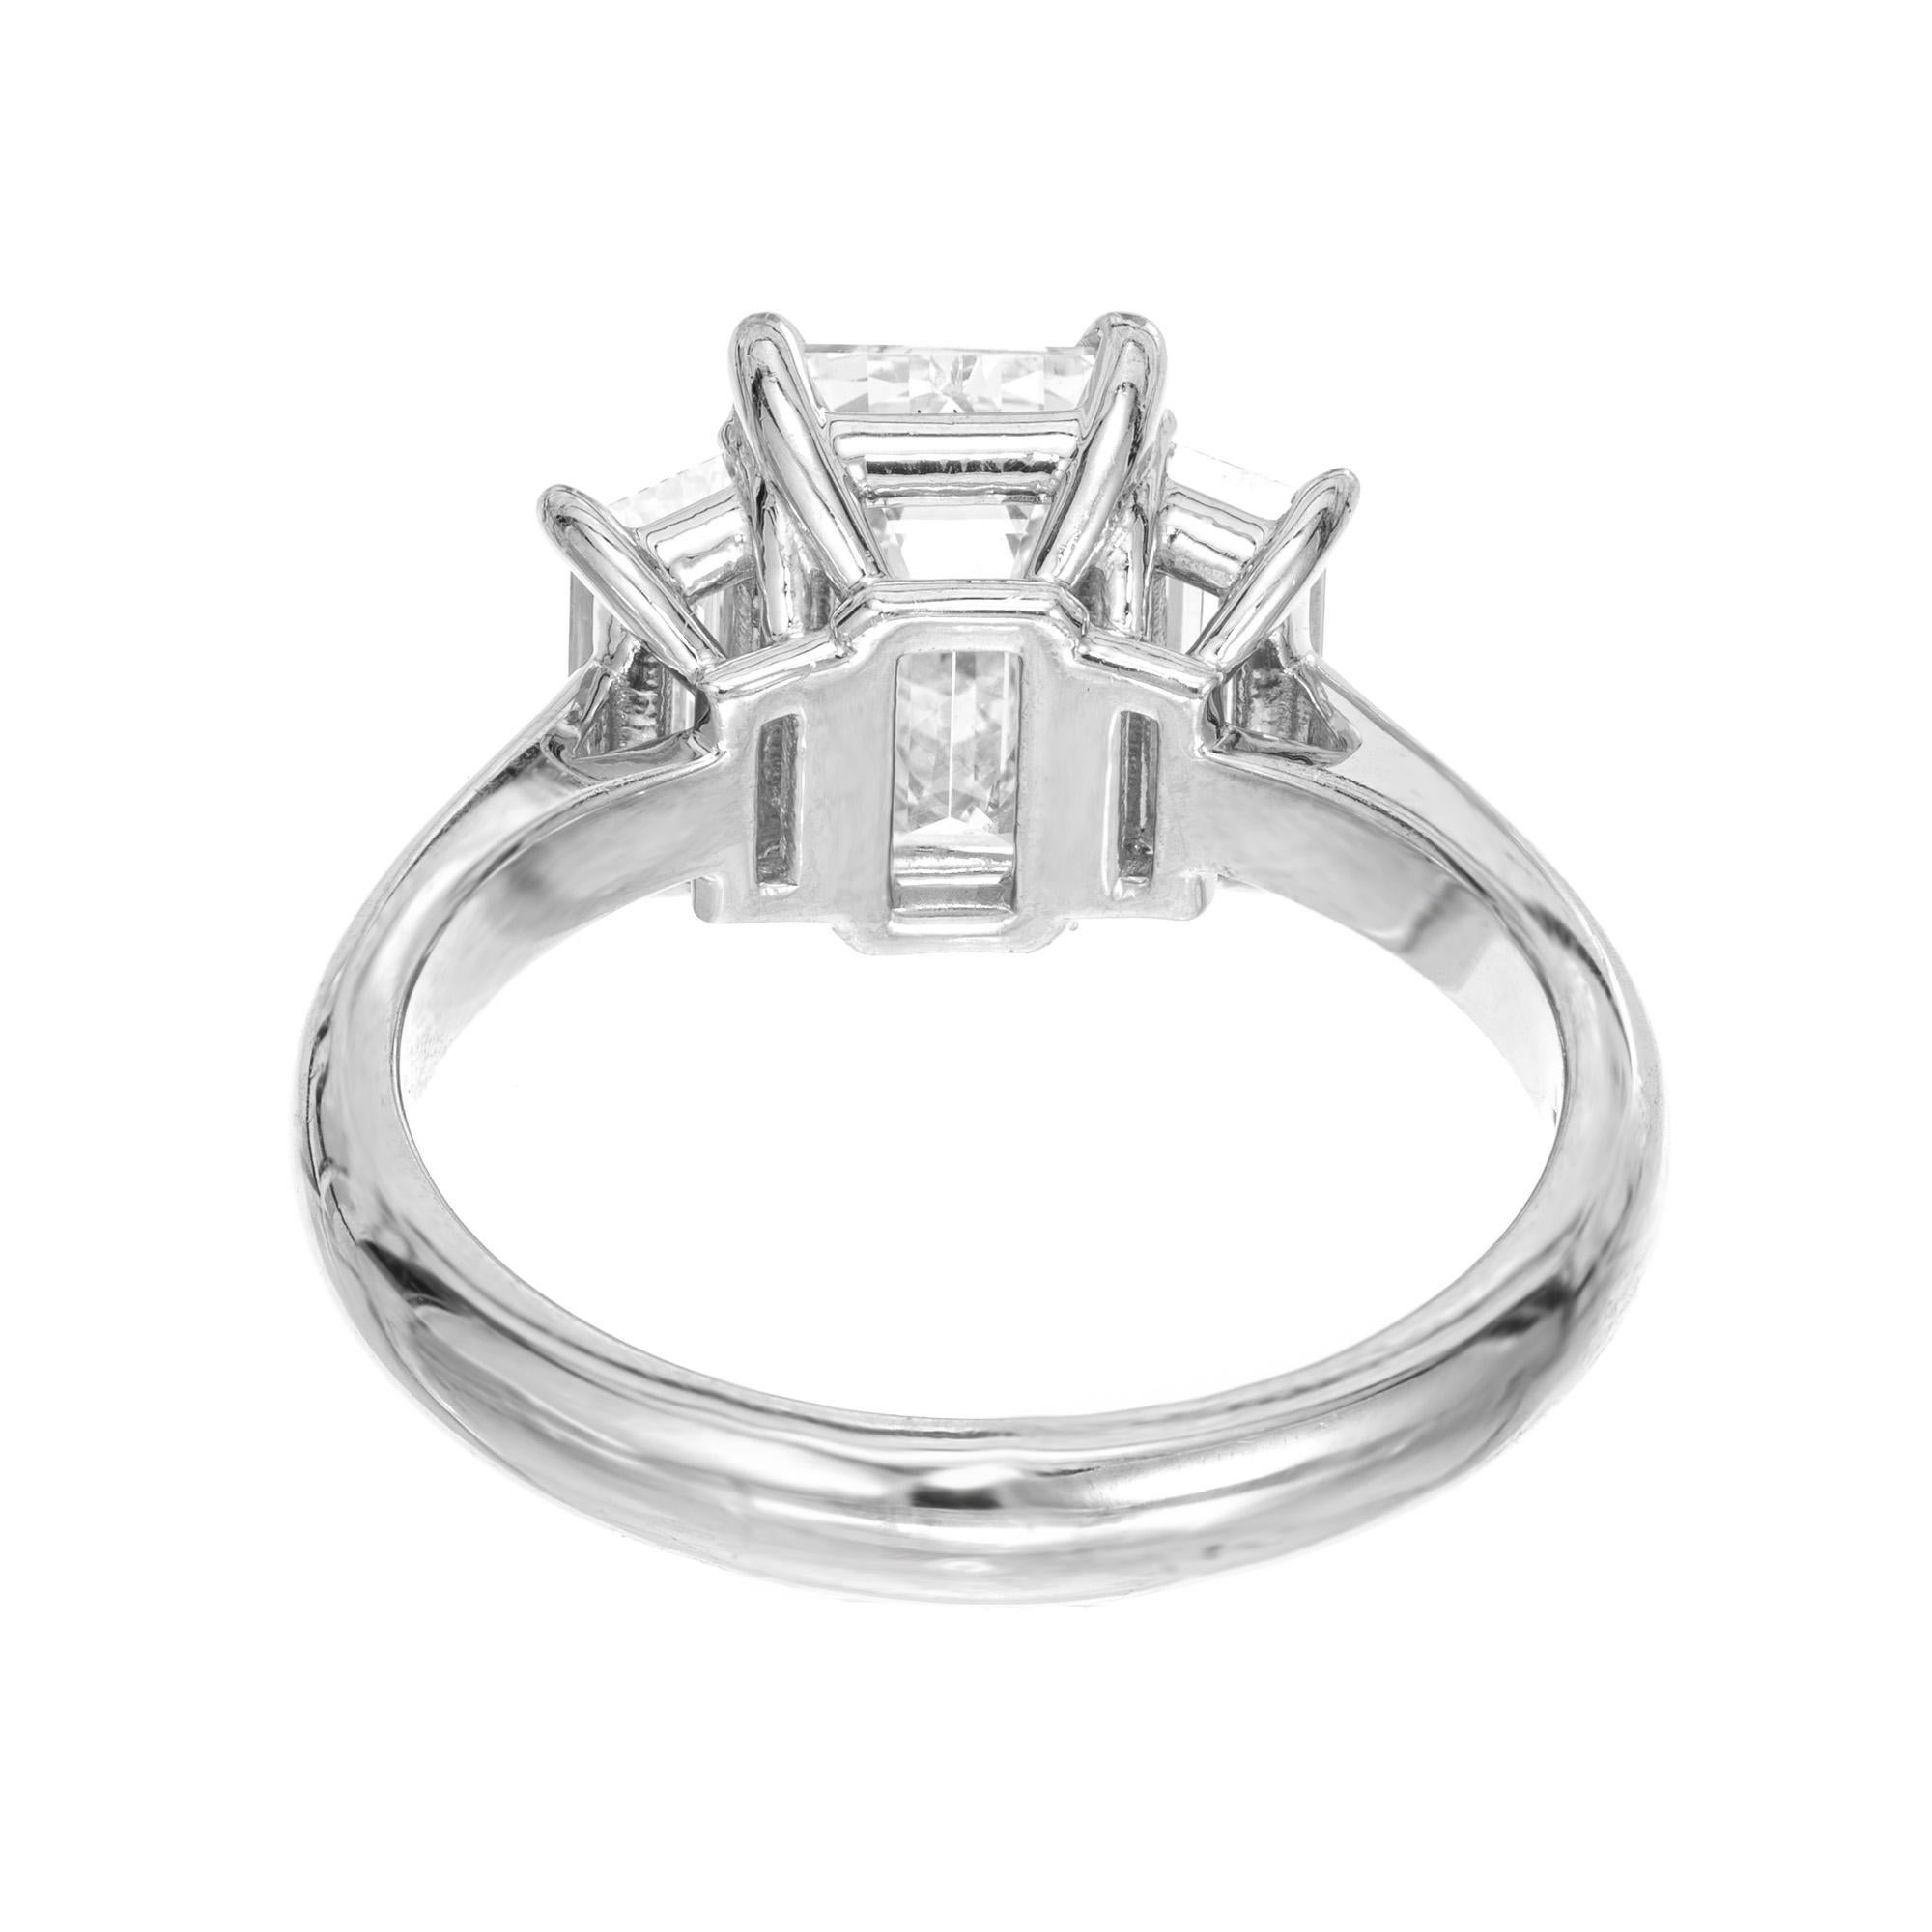 Peter Suchy GIA 2.41 Carat Diamond Platinum Three-Stone Engagement Ring In Excellent Condition For Sale In Stamford, CT